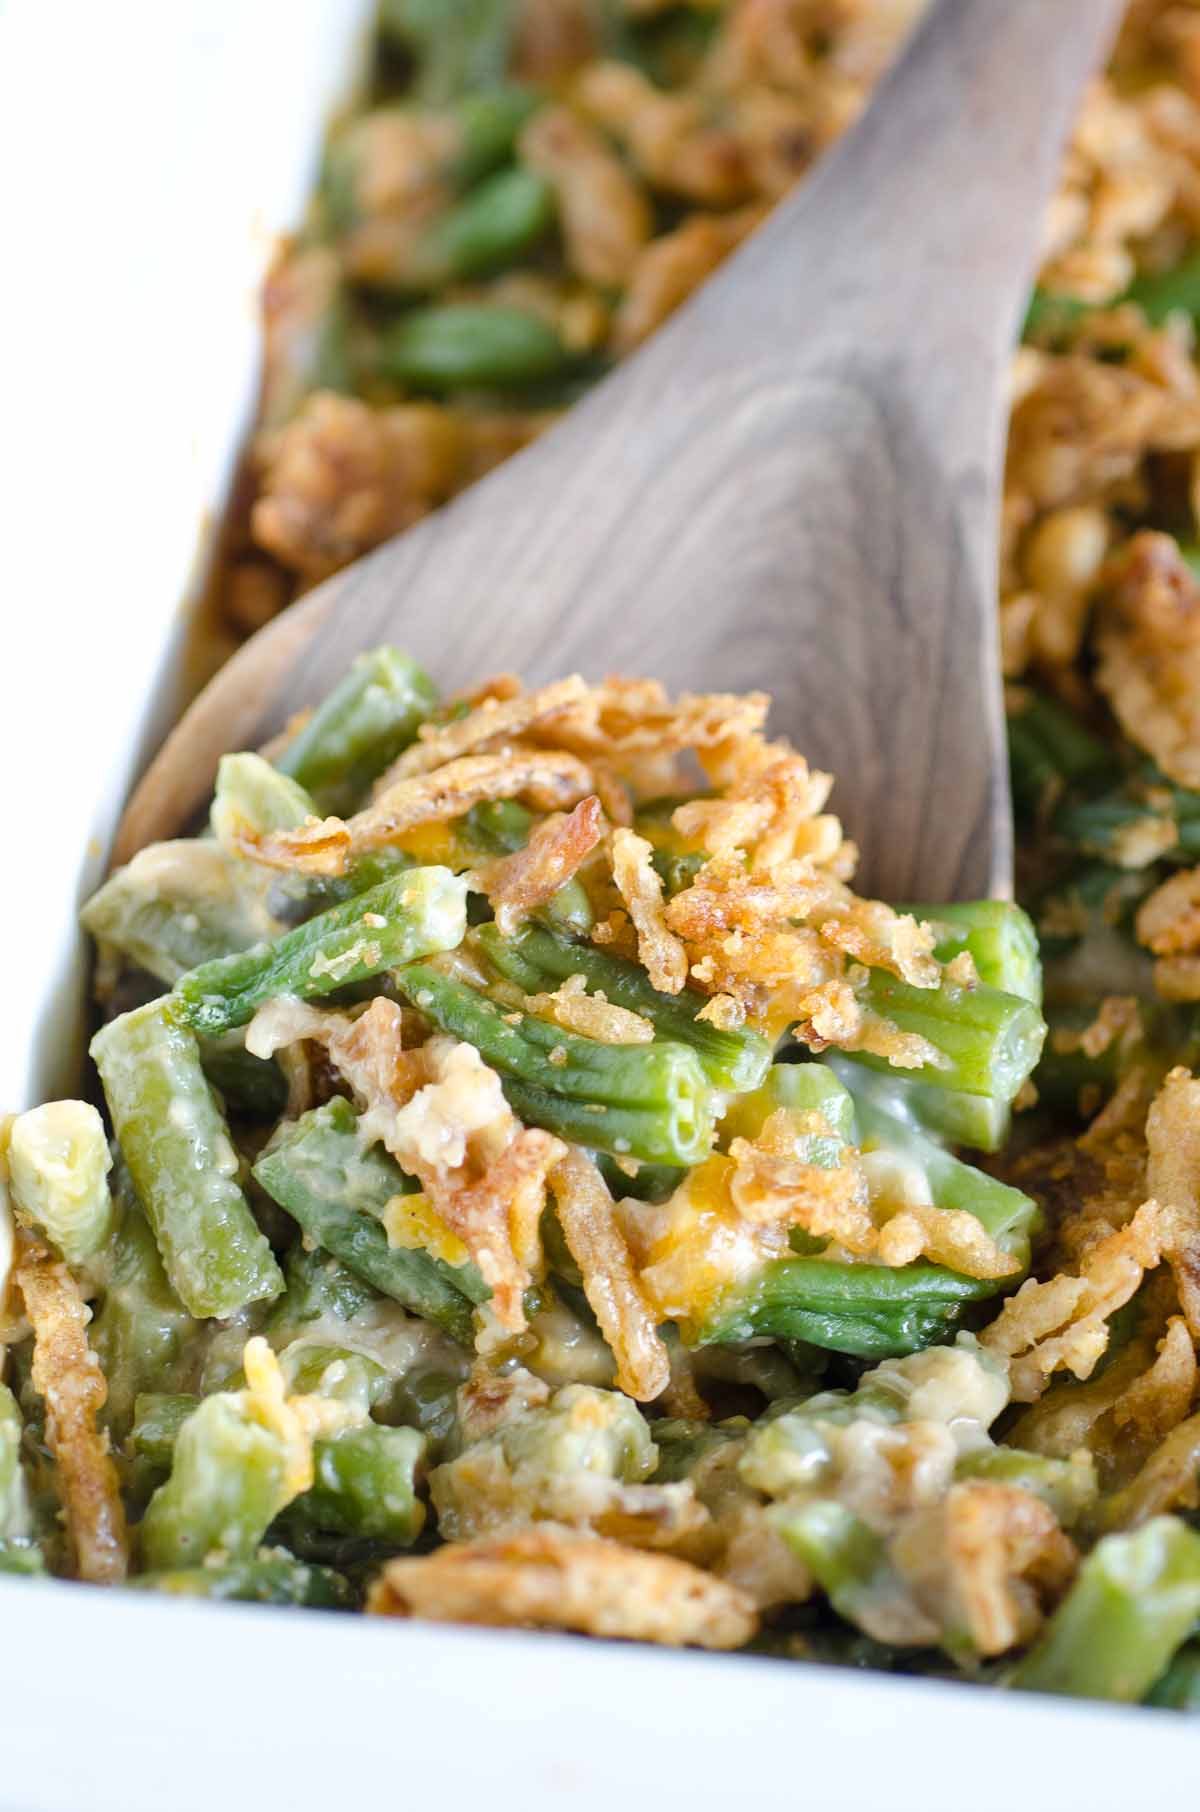 Easy Green Bean Casserole - Make for Thanksgiving and Christmas!